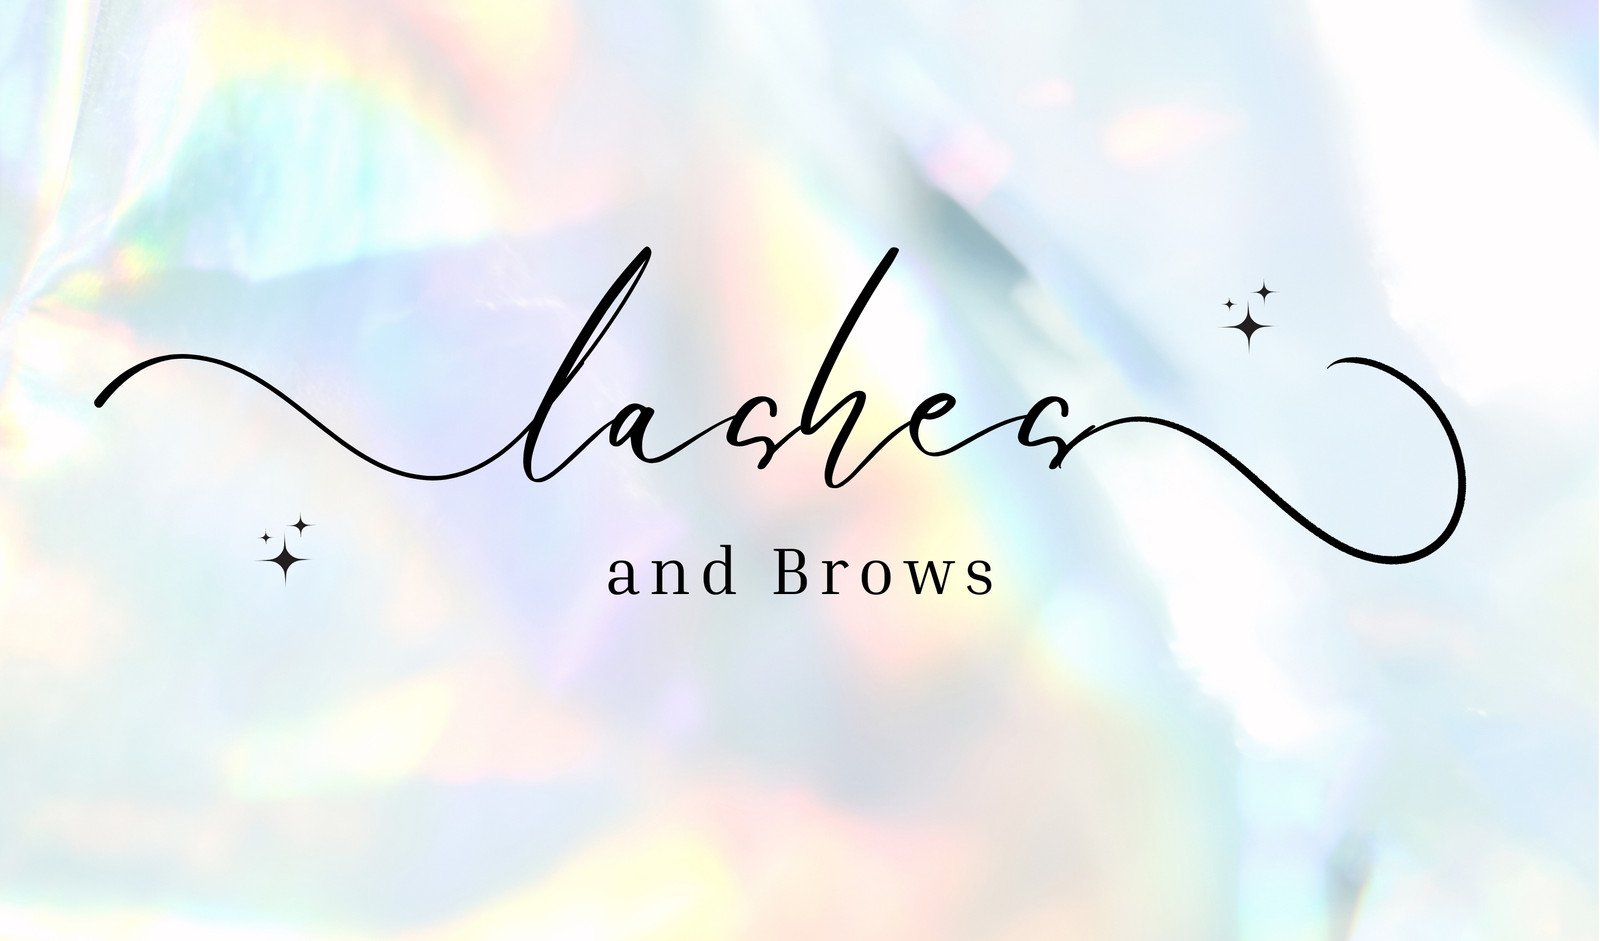 Colourful Pastel Holographic Rainbow Professional Lash and Brows Business Card